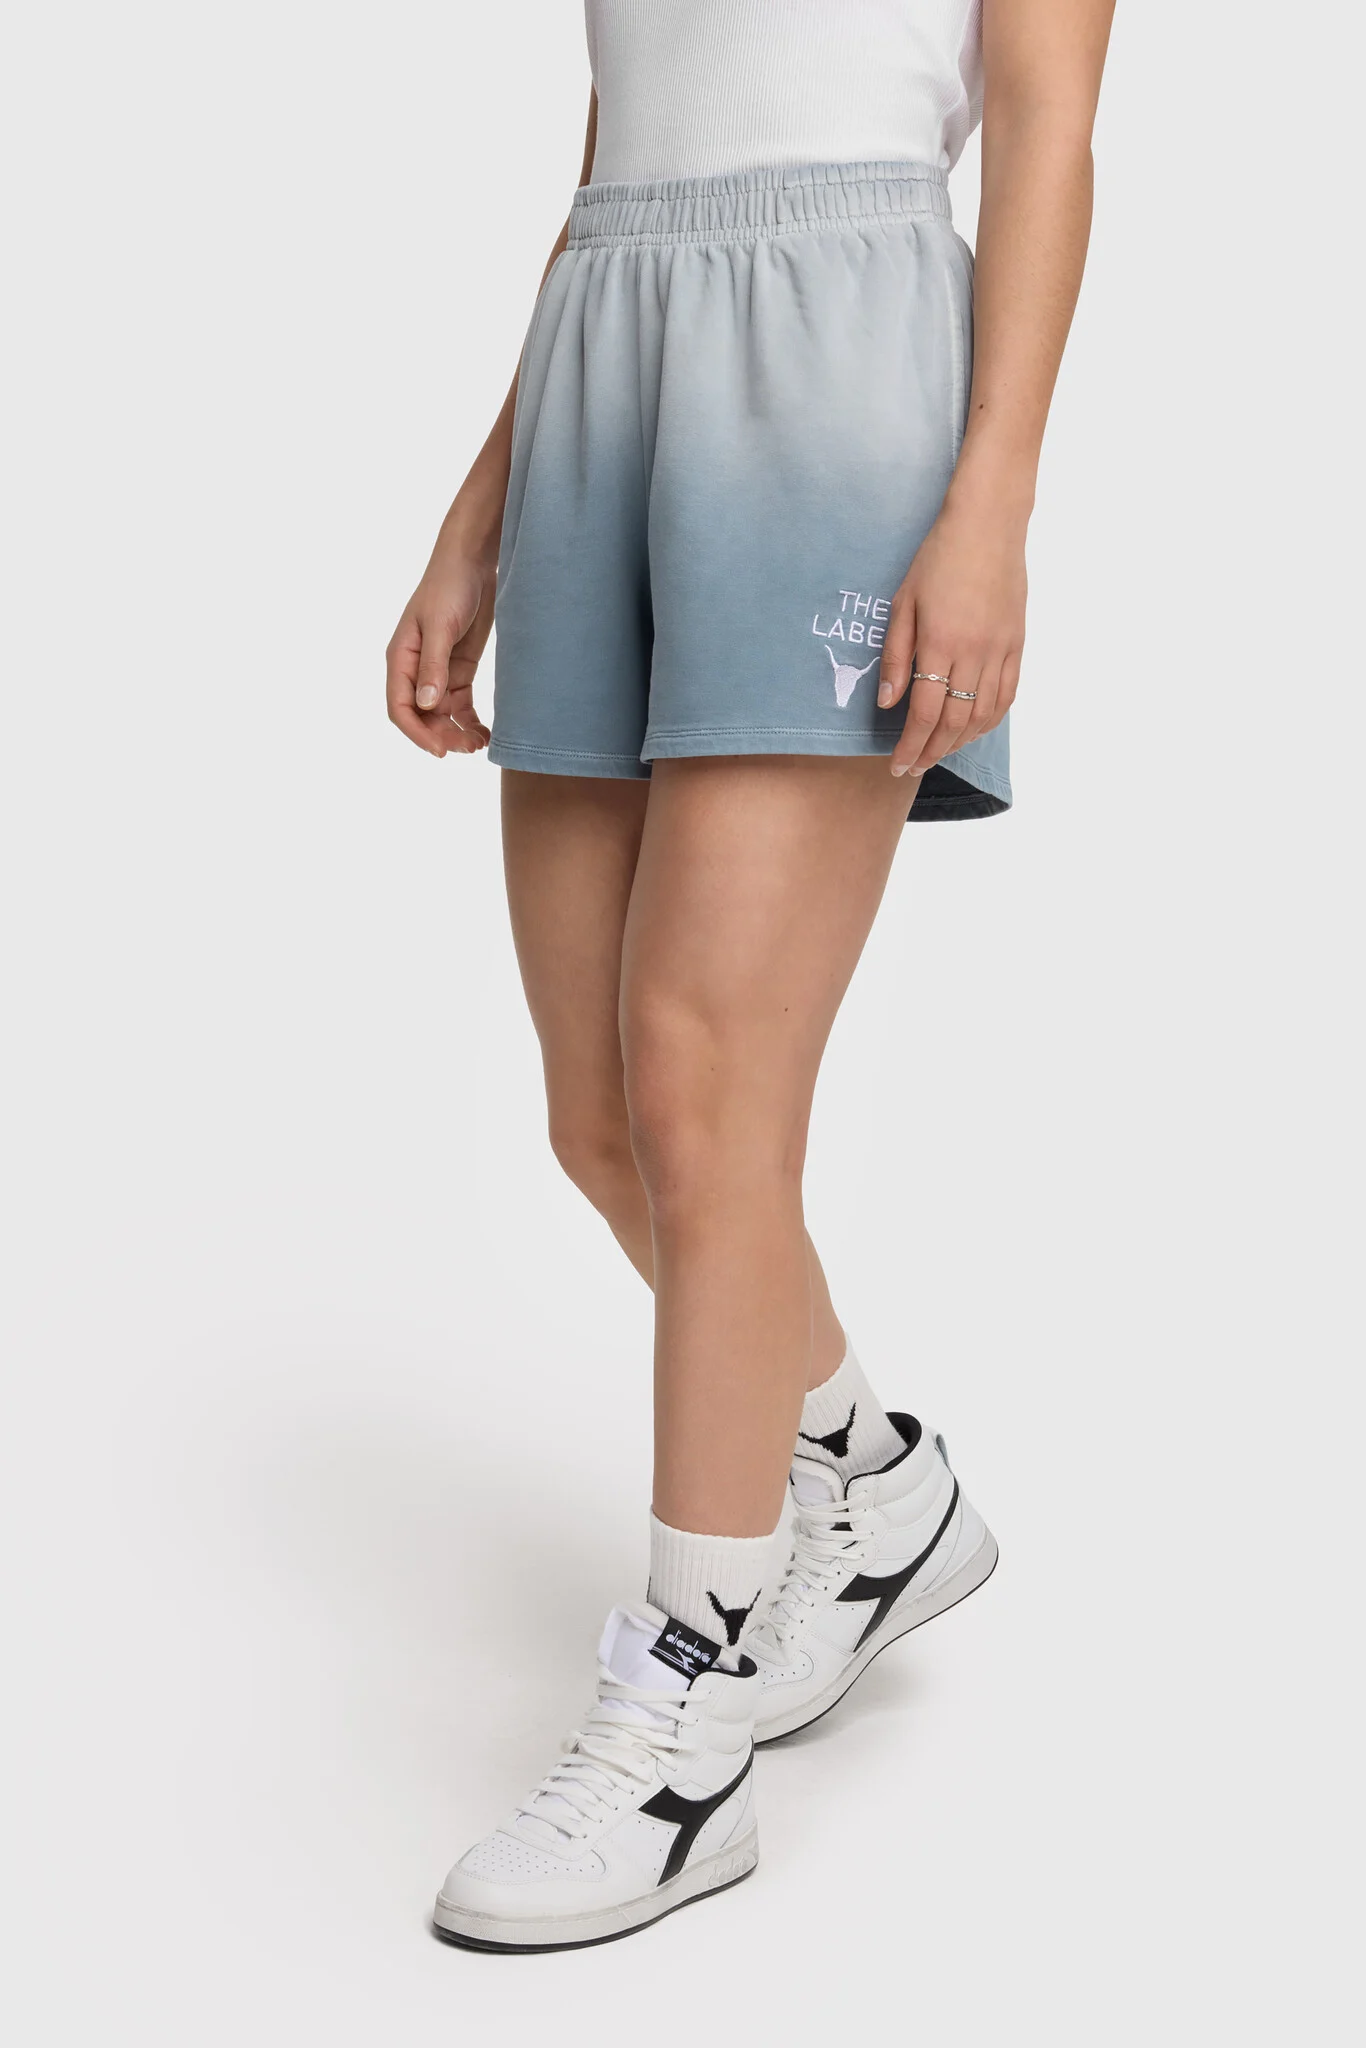 Alix The Label 2404107747 knitted sprayed sweat shorts